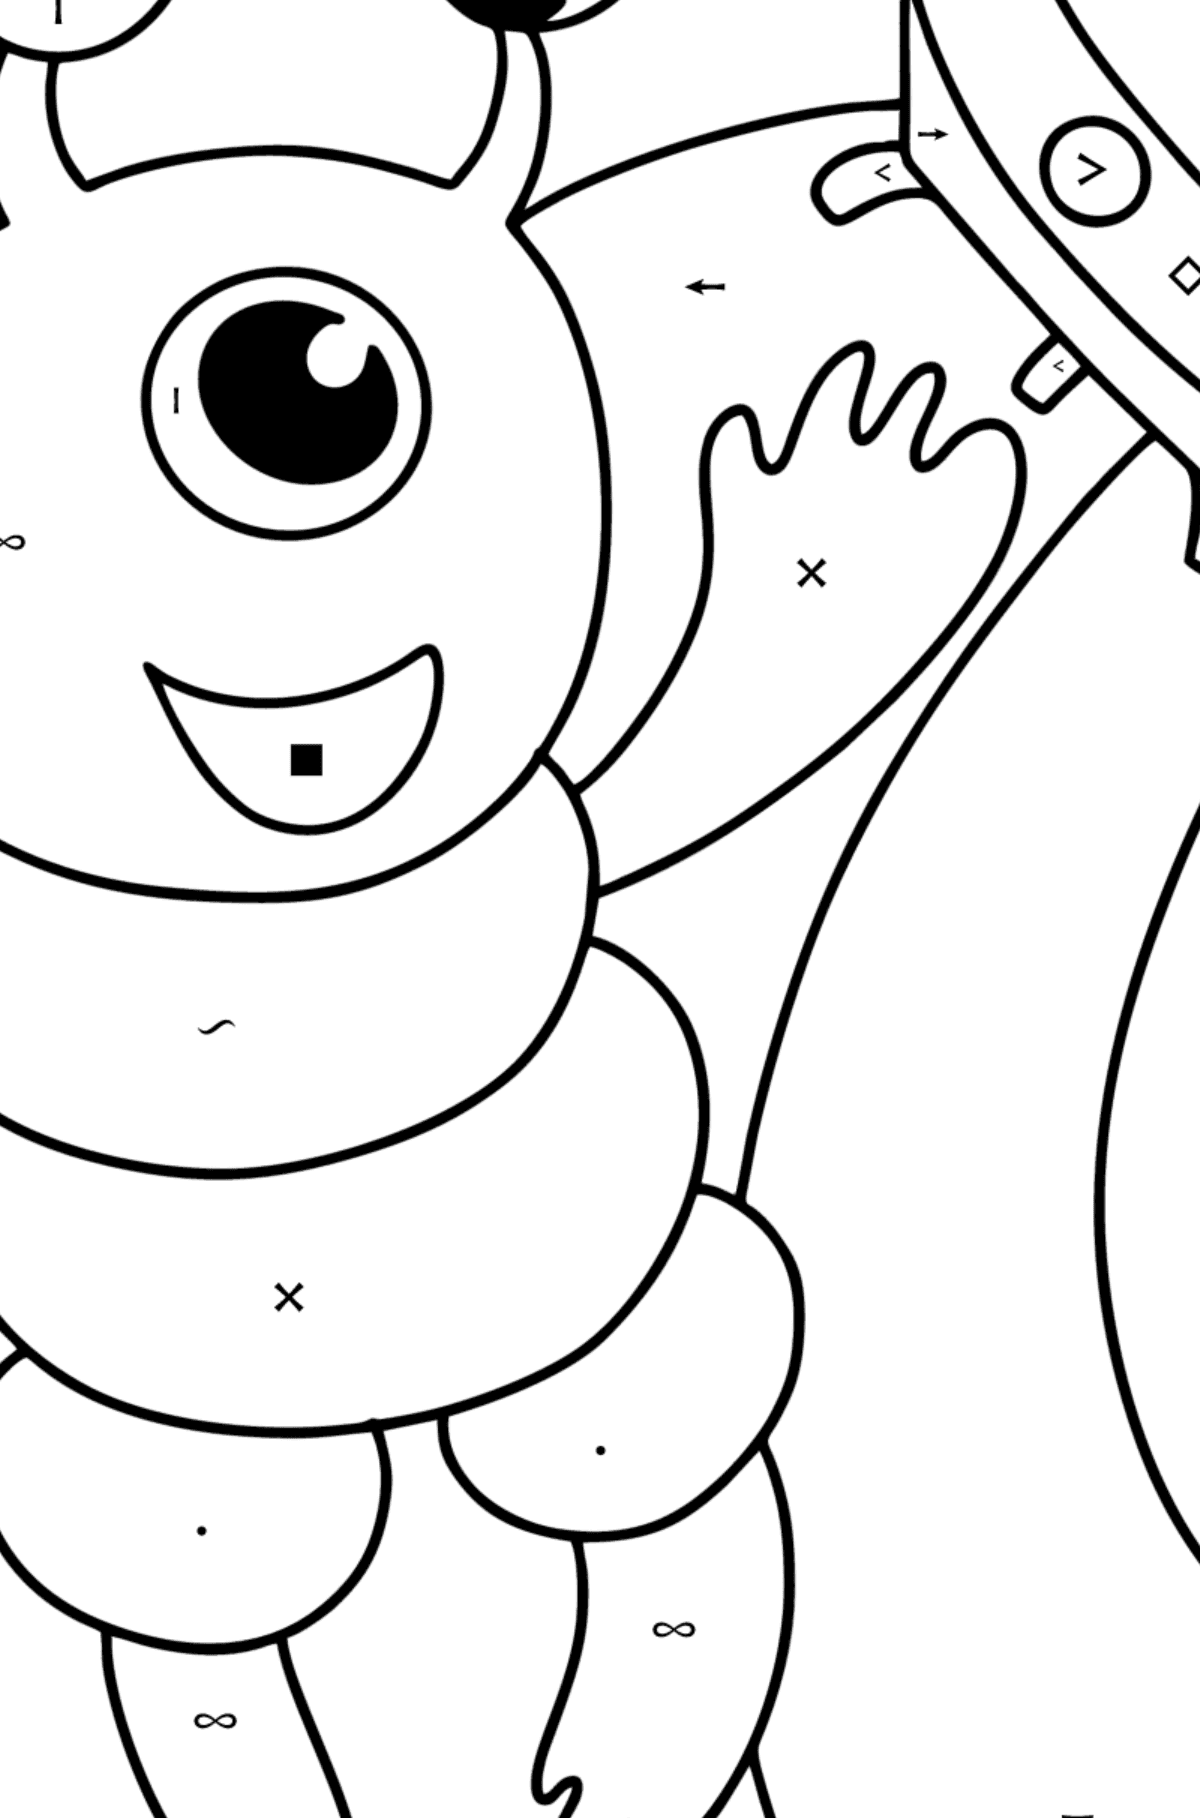 Alien in space coloring page - Coloring by Symbols for Kids